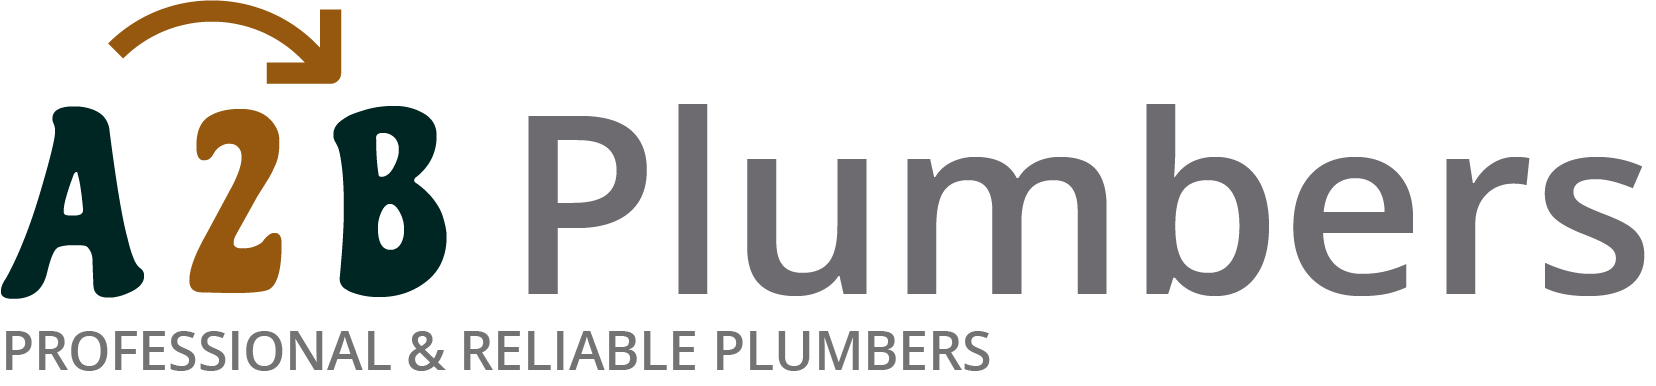 If you need a boiler installed, a radiator repaired or a leaking tap fixed, call us now - we provide services for properties in Hyndburn and the local area.